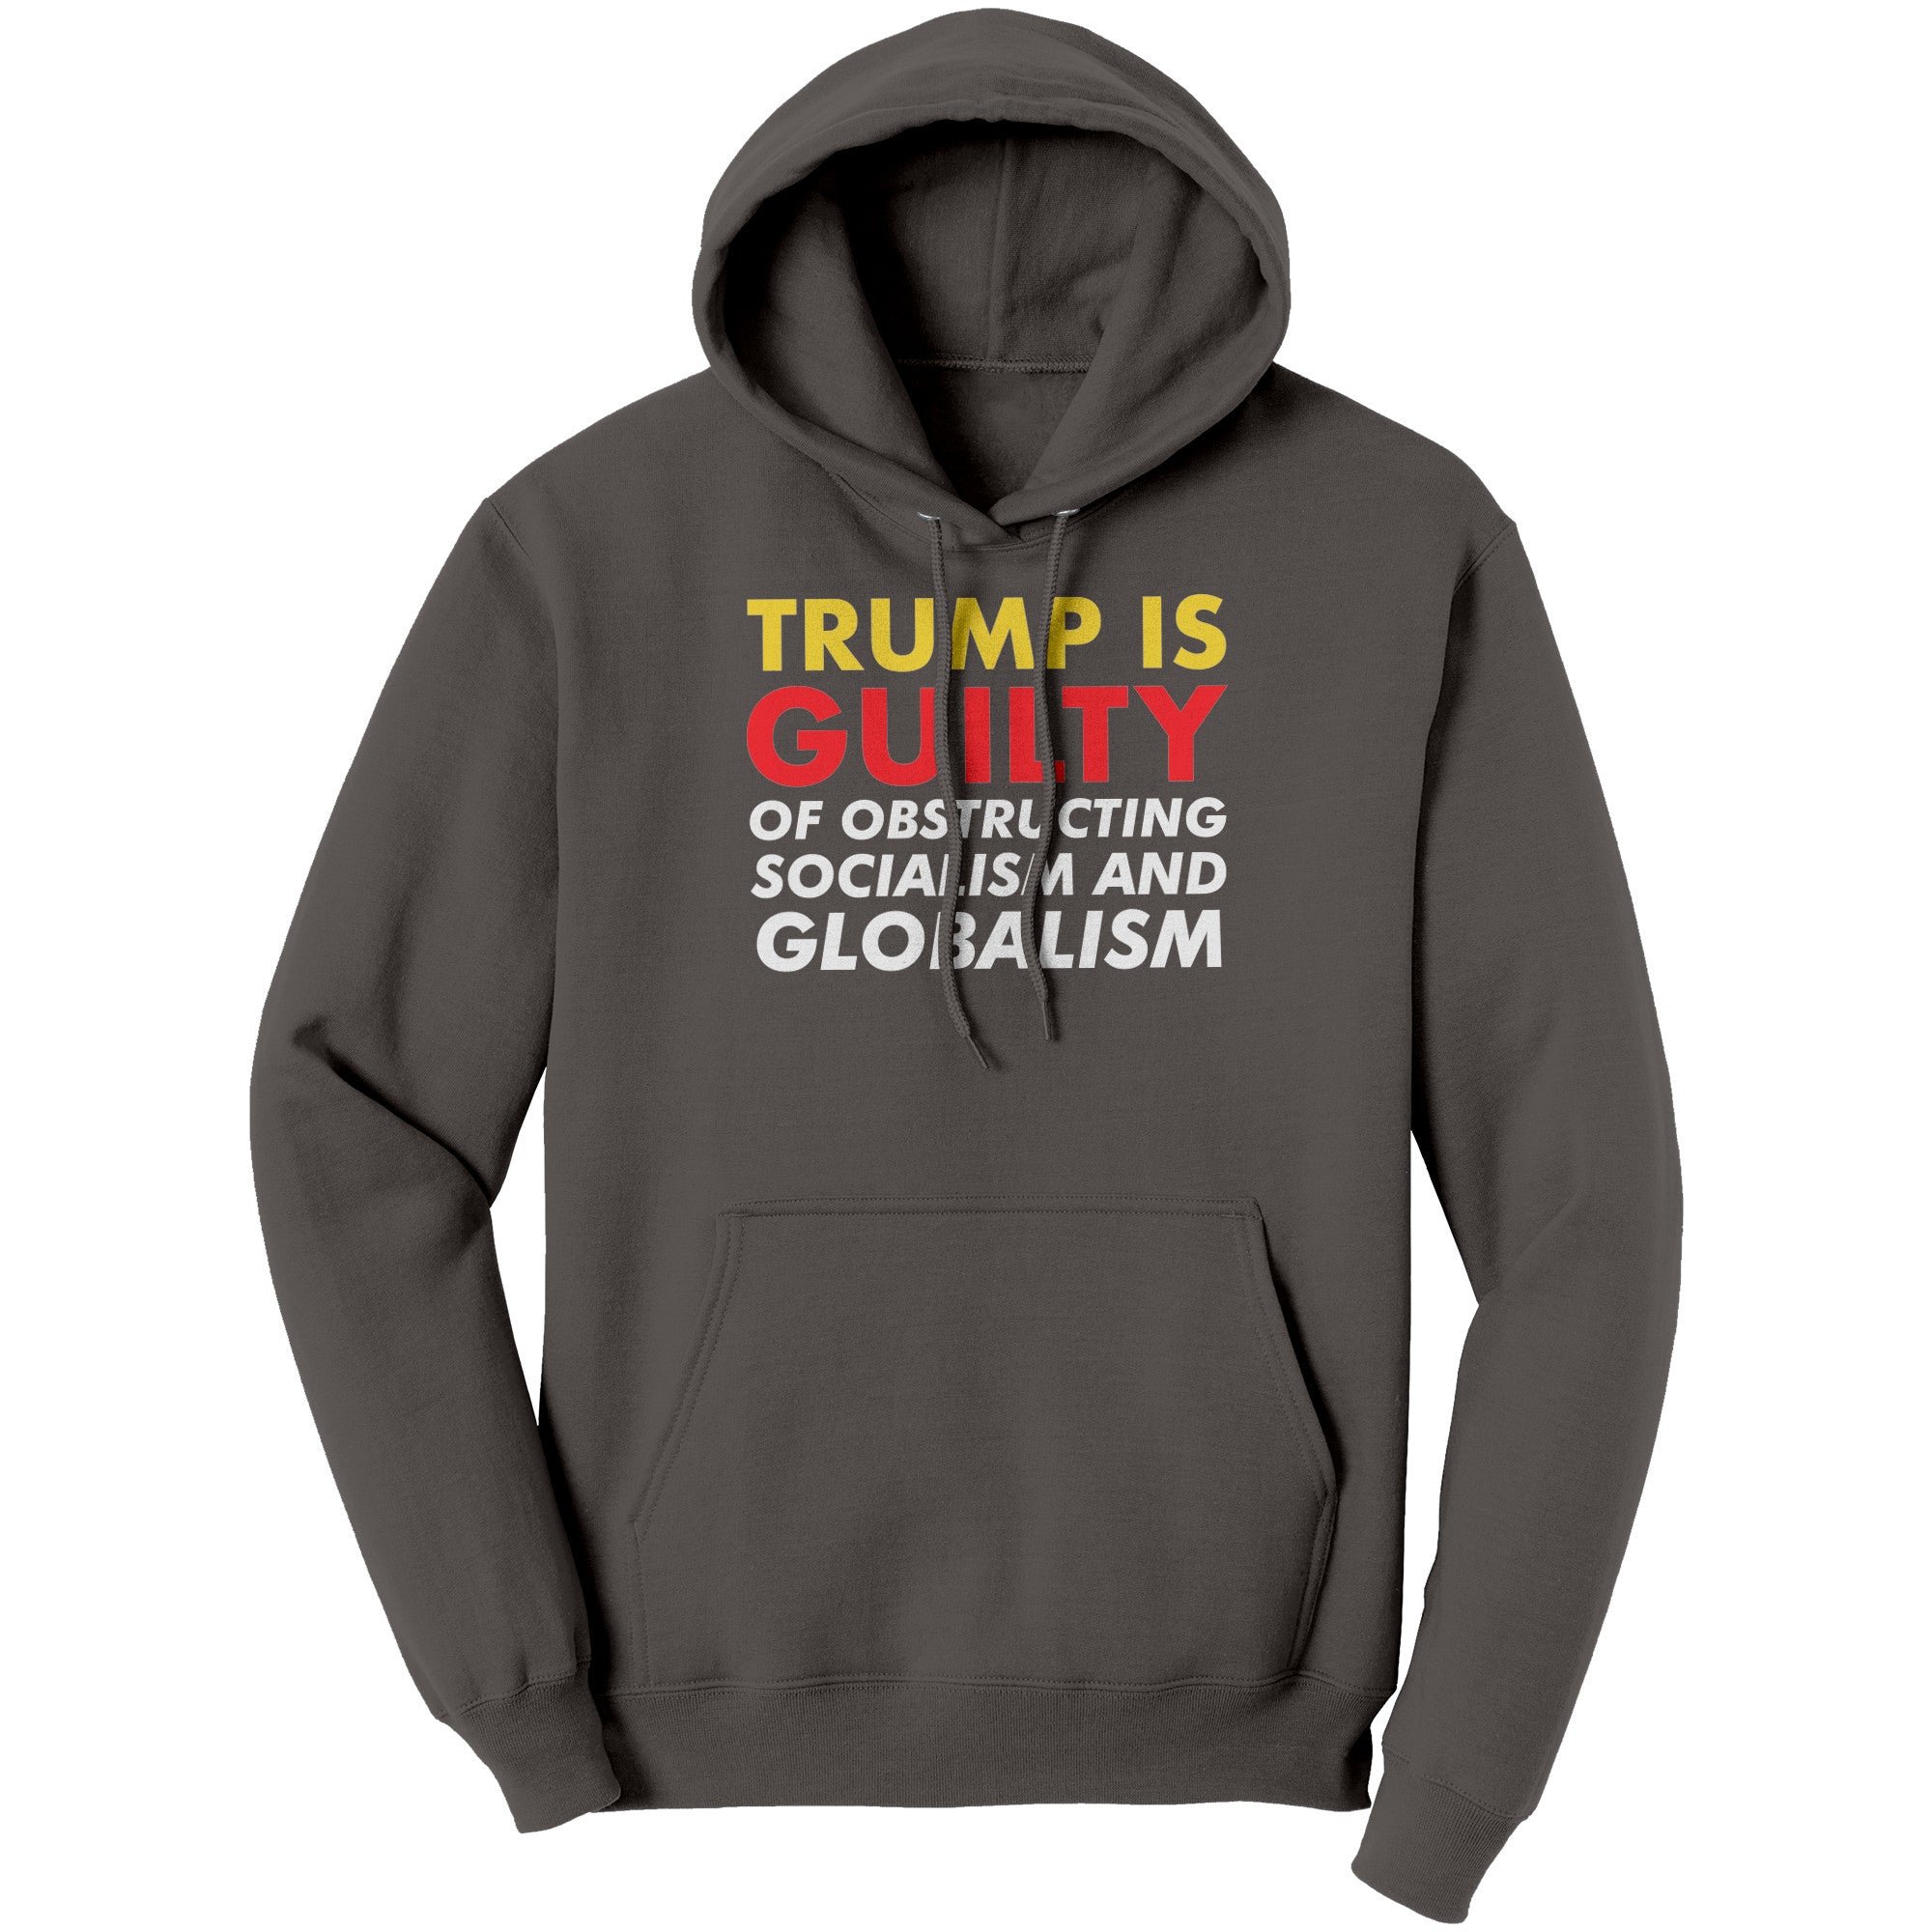 Trump is Guilty Of Obstructing Socialism And Globalism -Apparel | Drunk America 